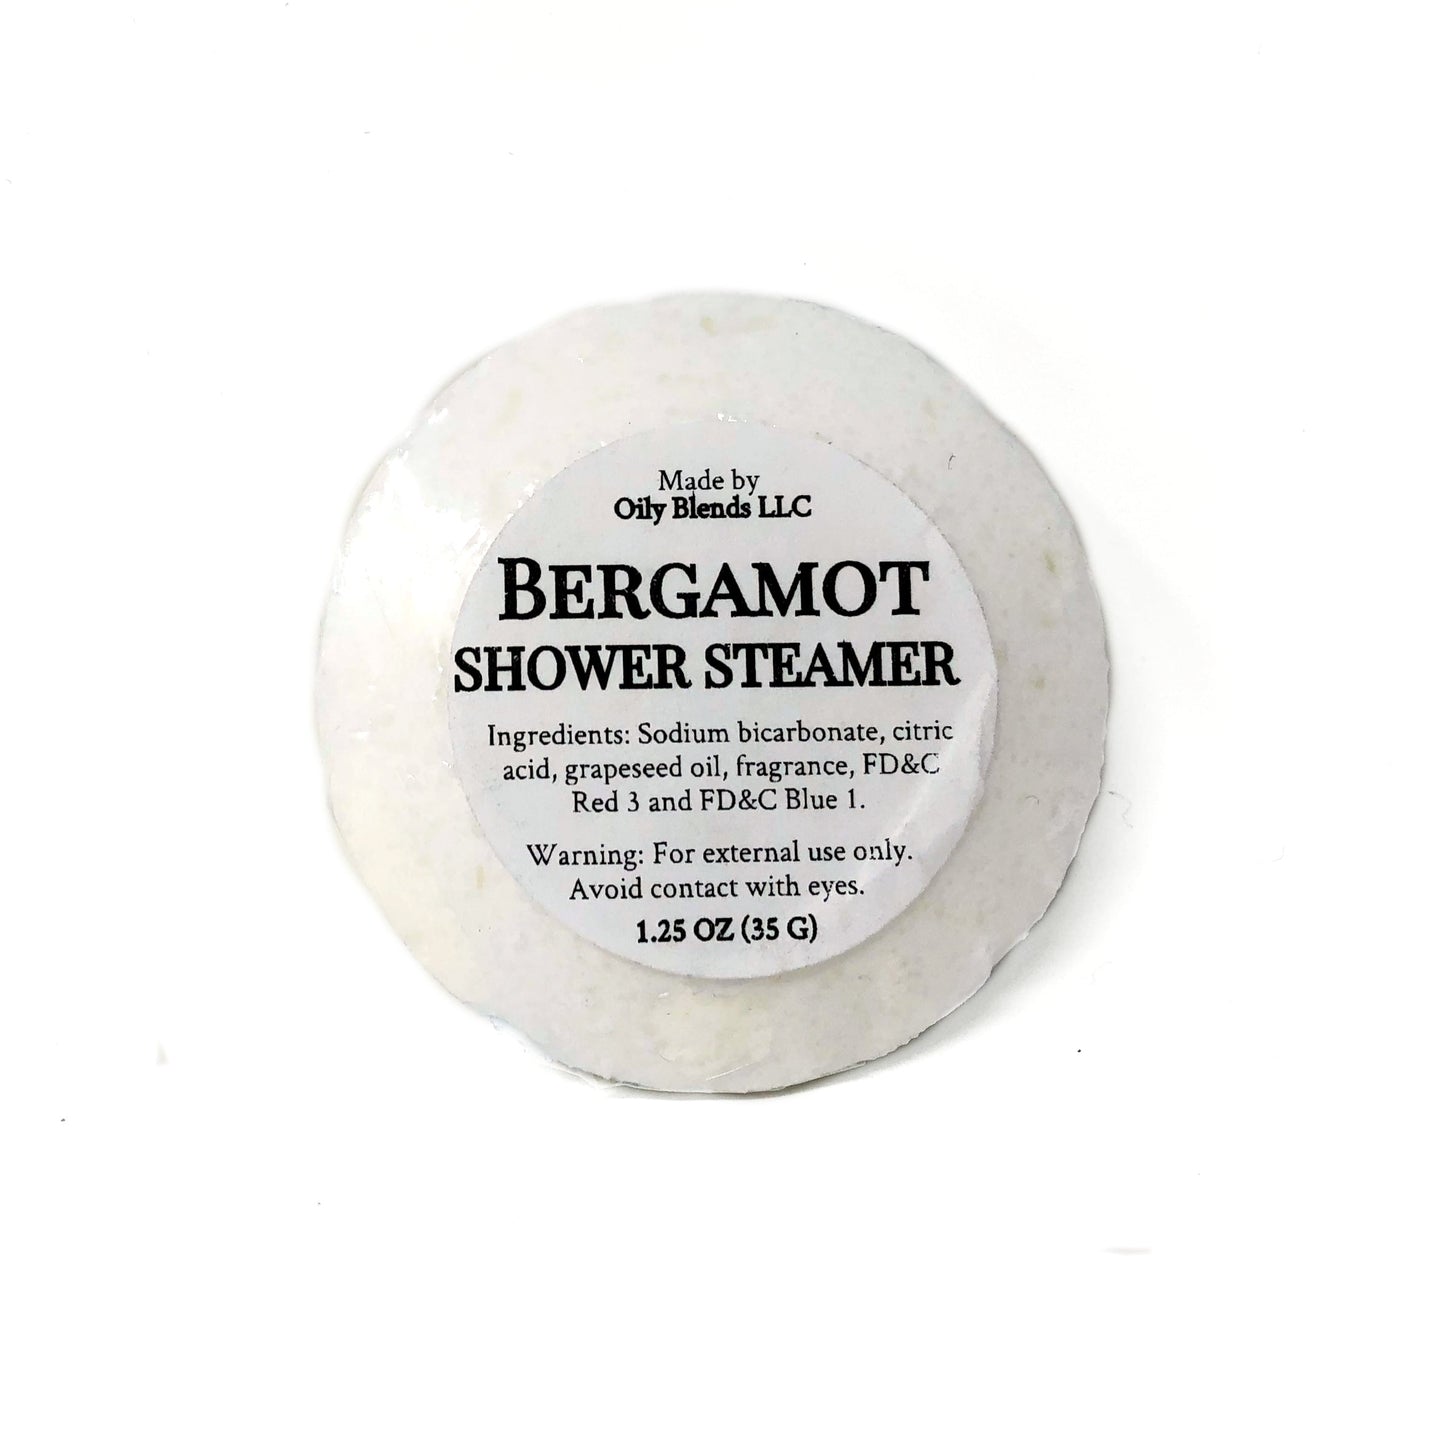 Gift Set with Men's Shower Steamers and plushy